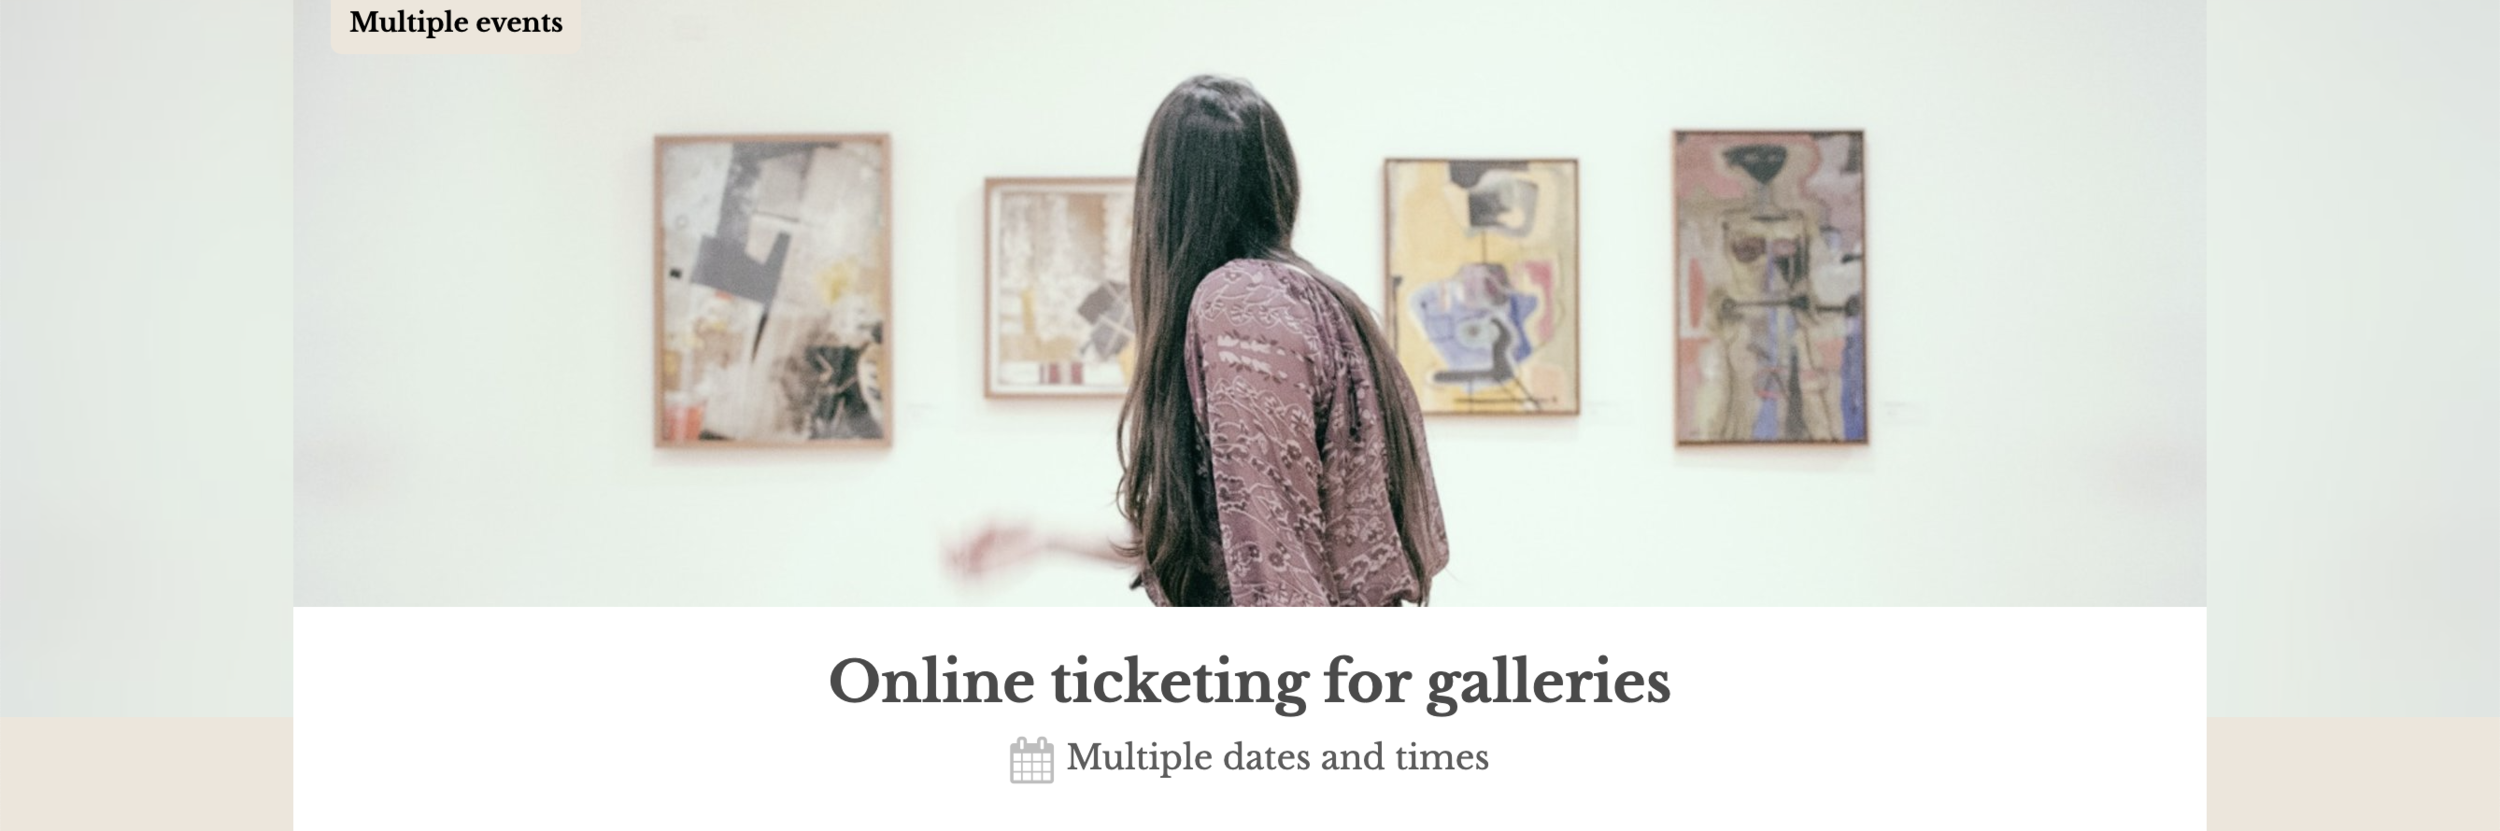 Sell tickets for an art gallery